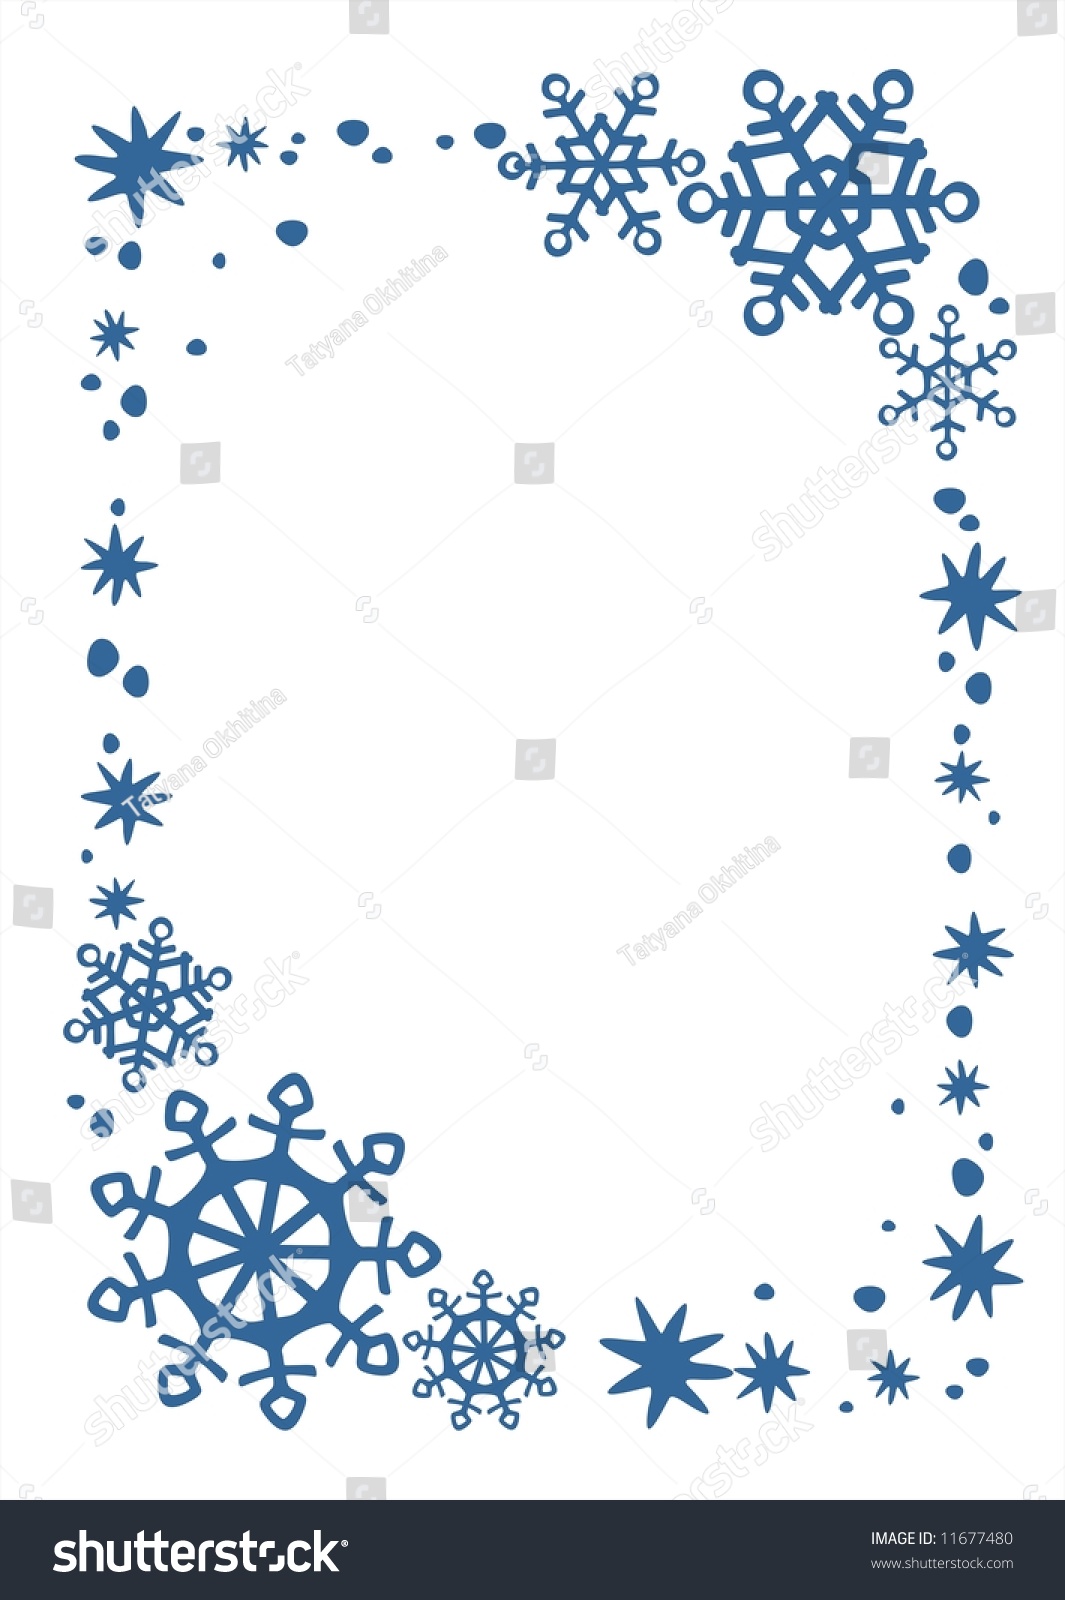 Blue Snowflakes And Stars Border On A White Background. Christmas ...